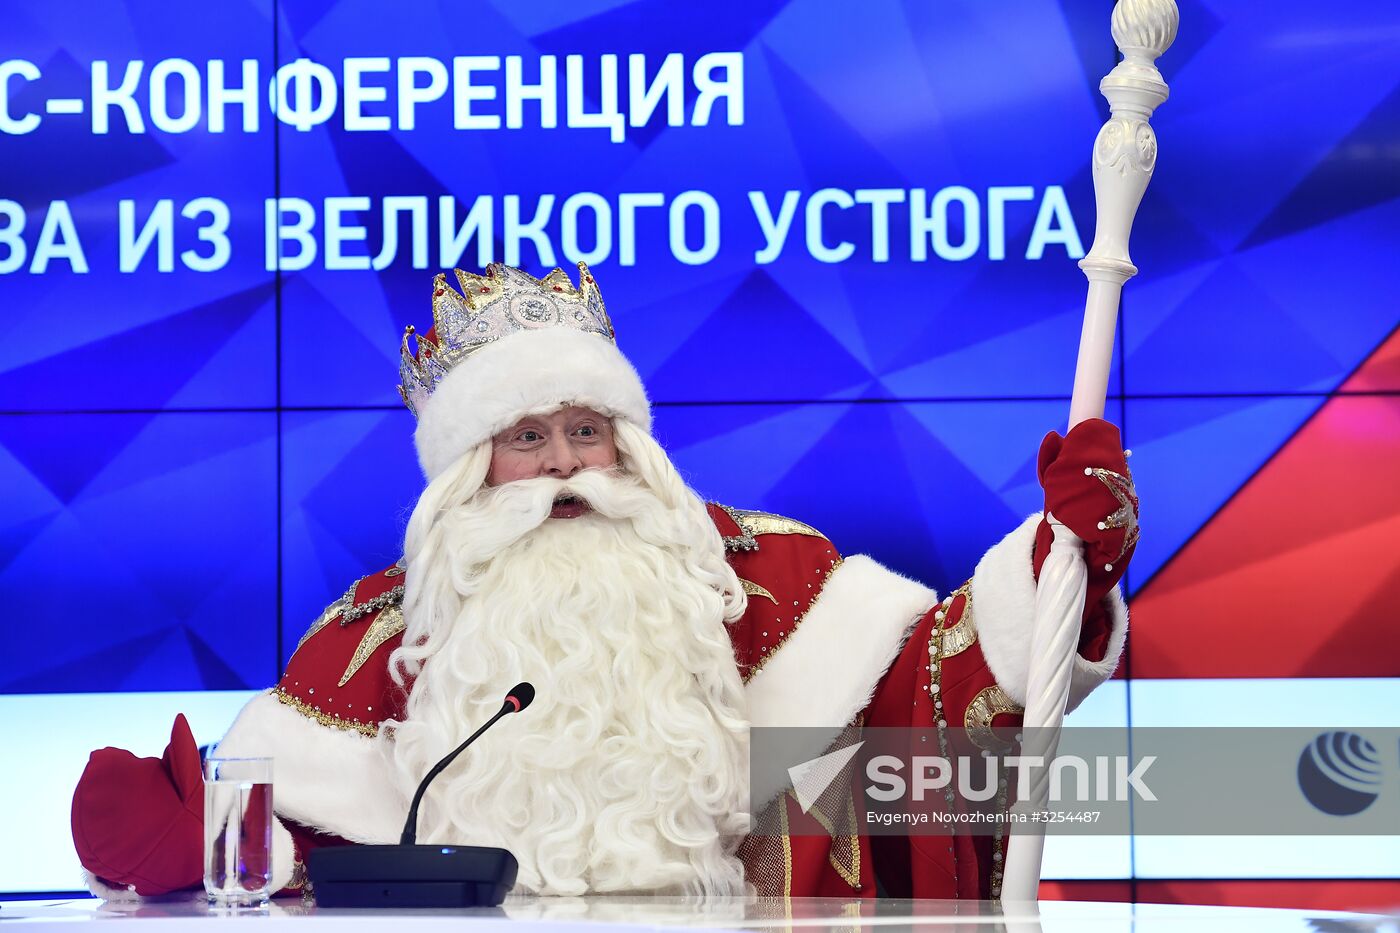 News conference with Grandfather Frost